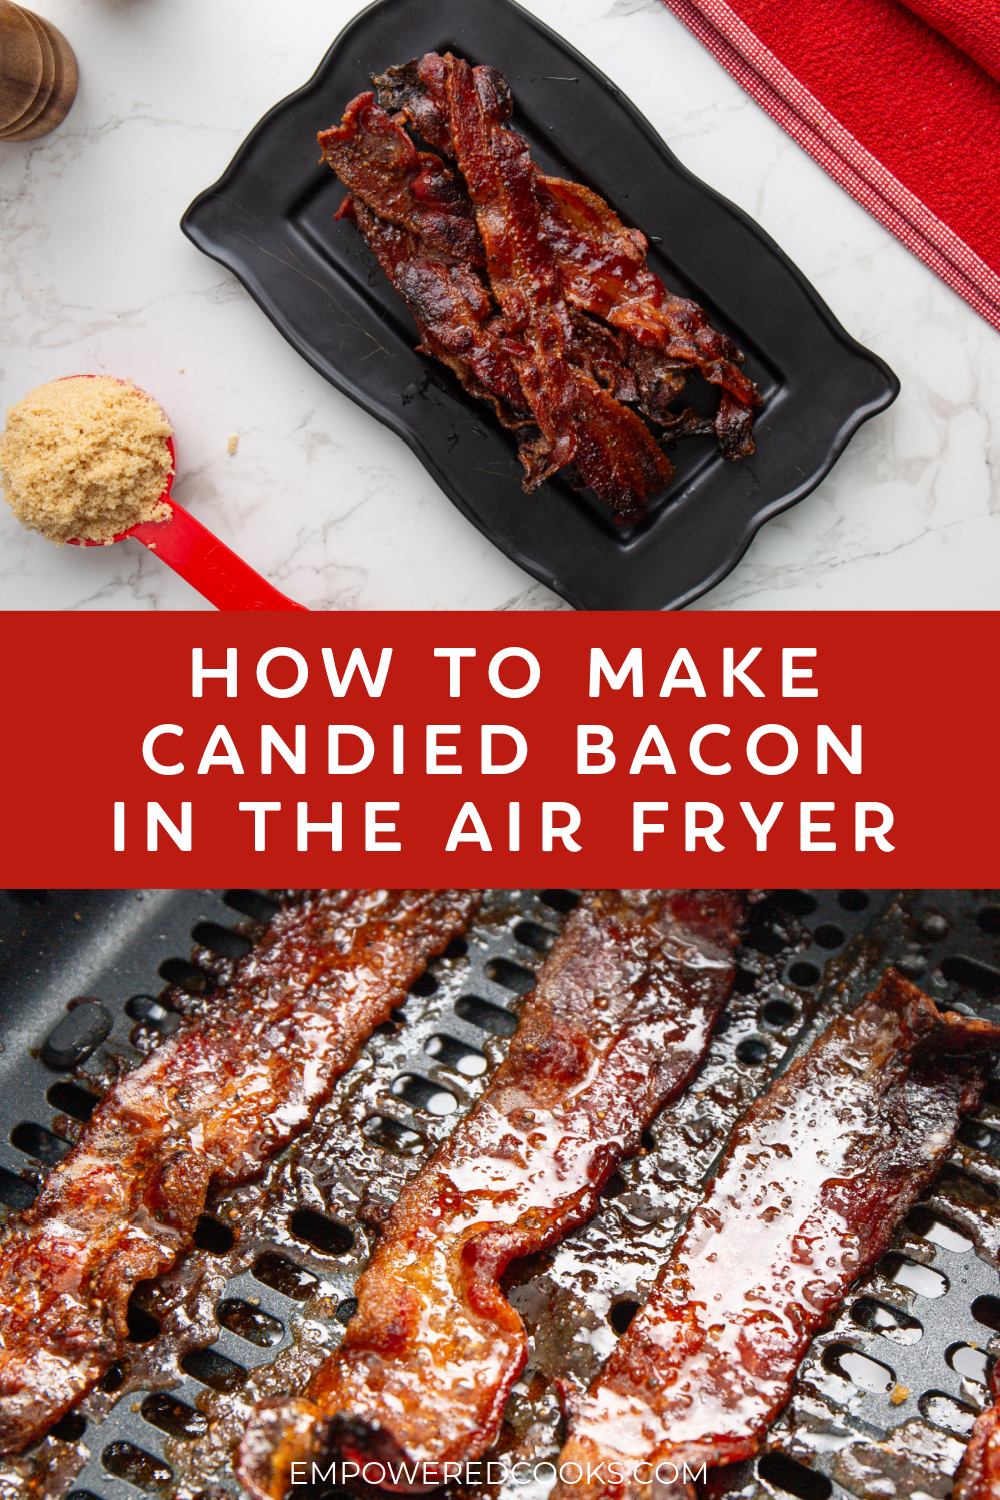 How to make caandied bacon in the air fryer